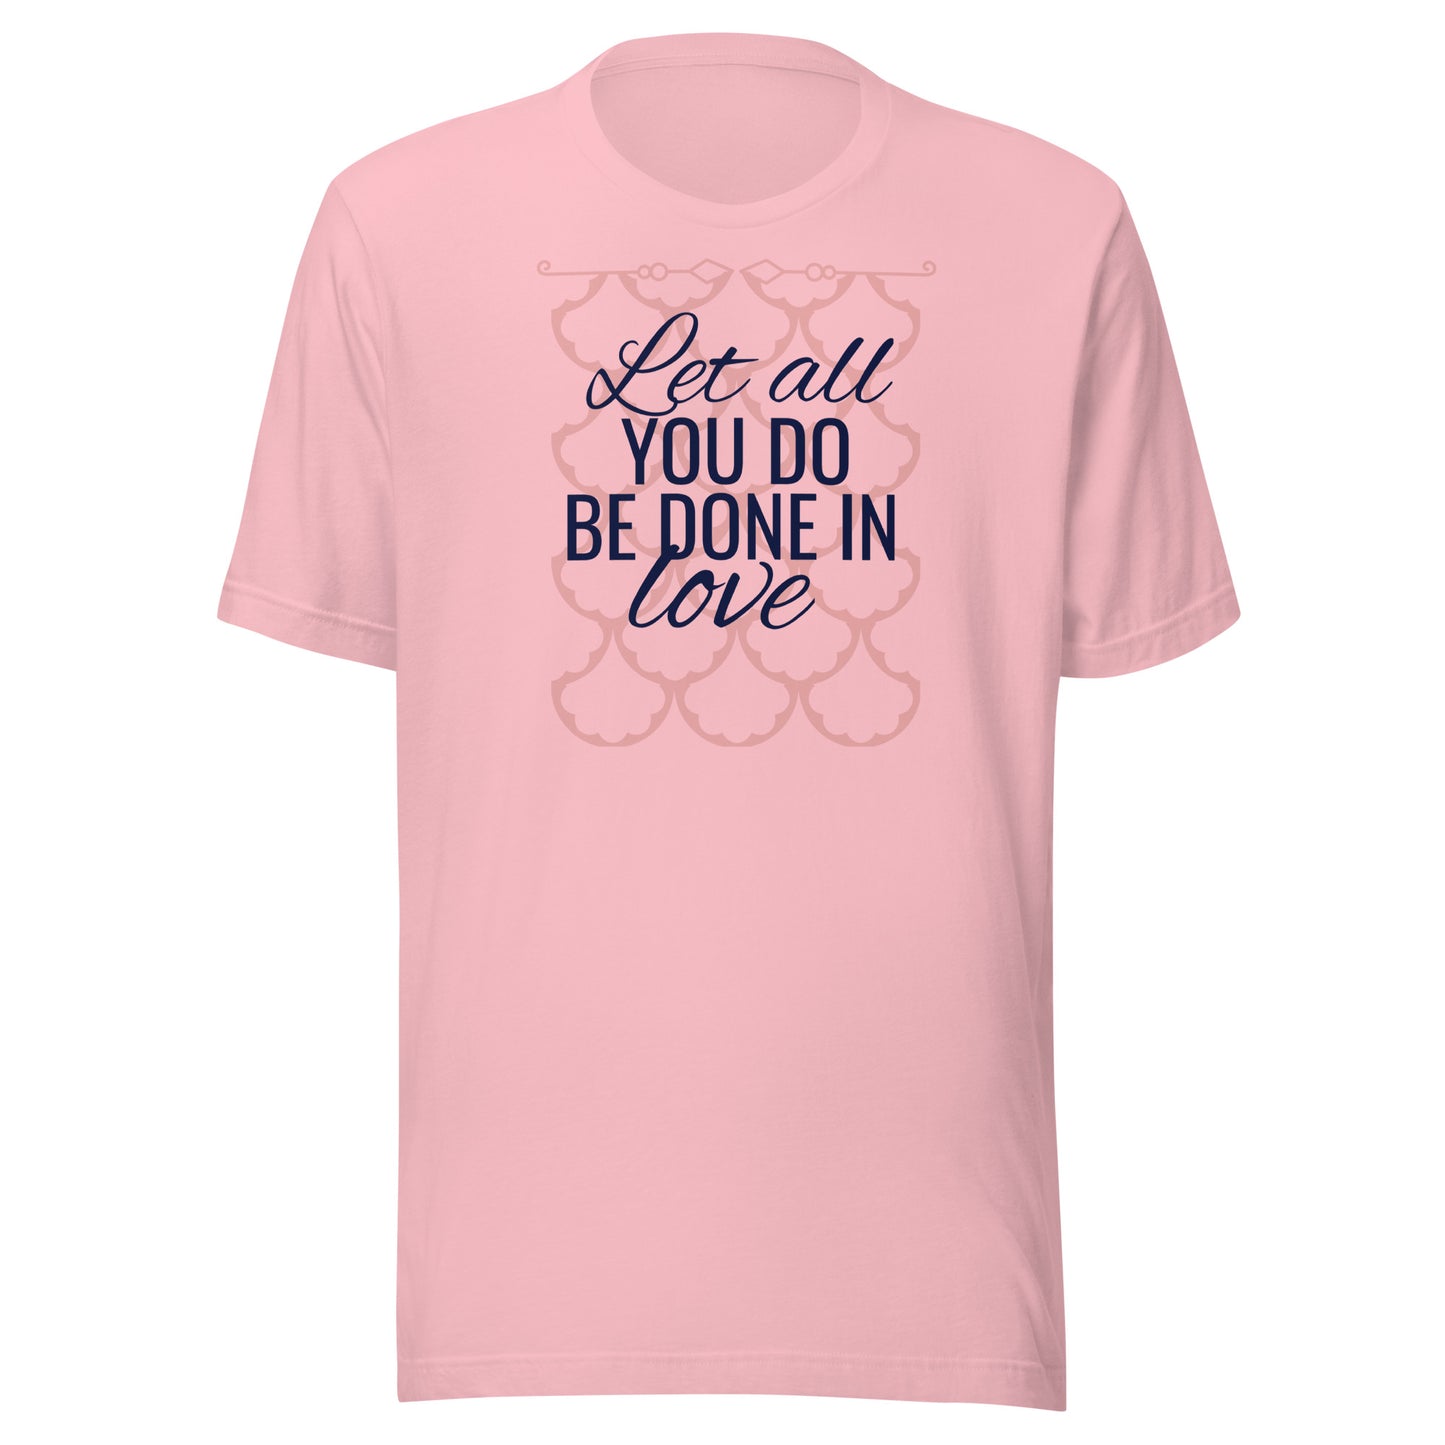 Let all you do be done in love. T-Shirt